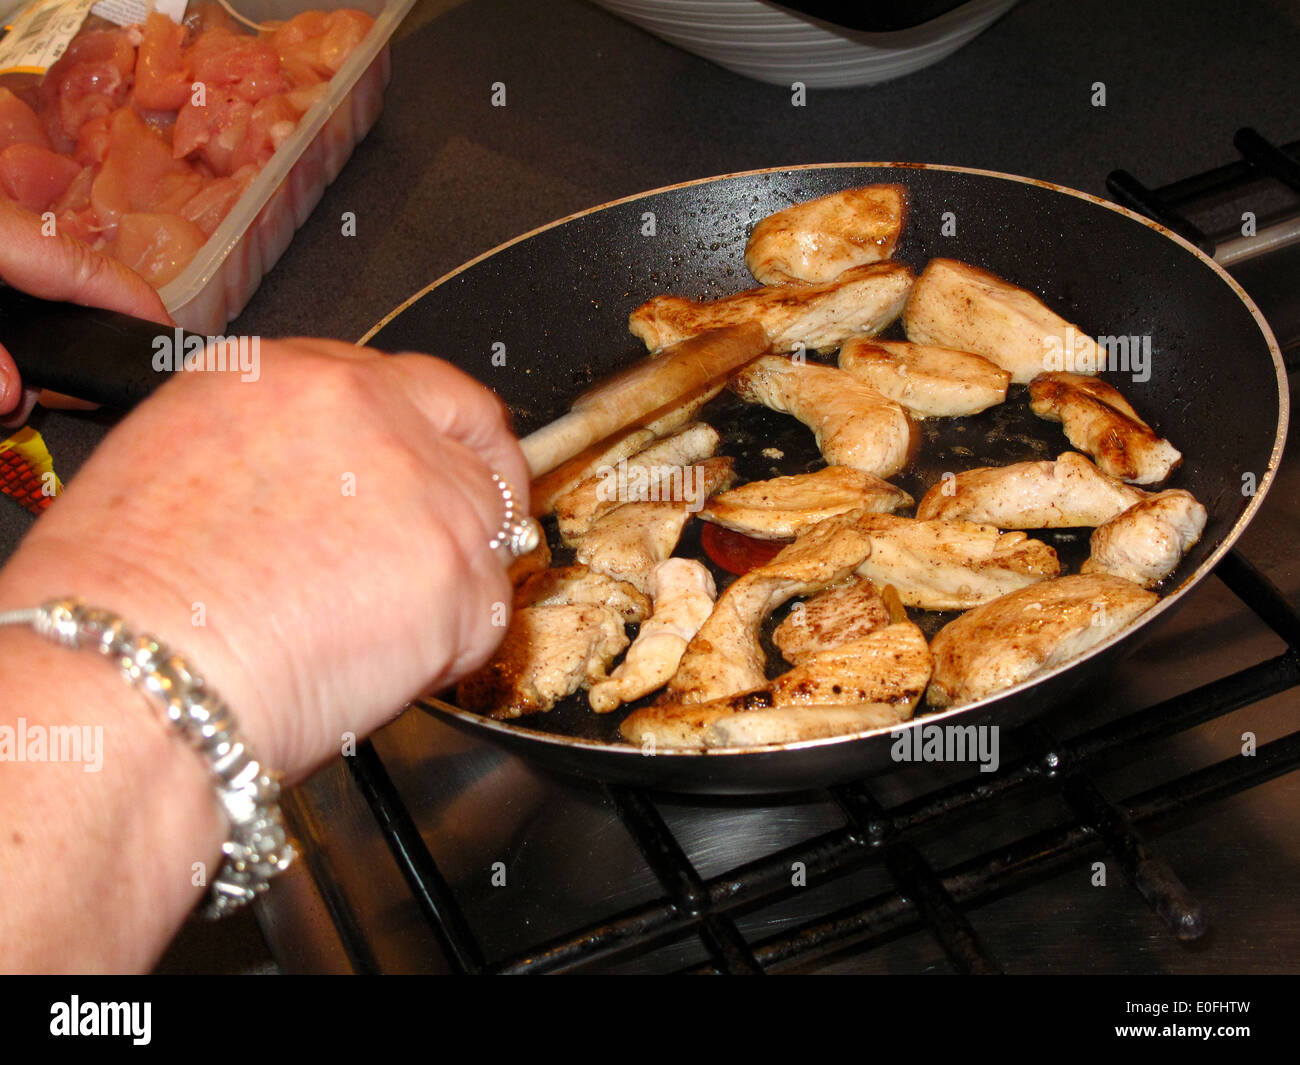 Woman frying chicken pieces in pan Stock Photo